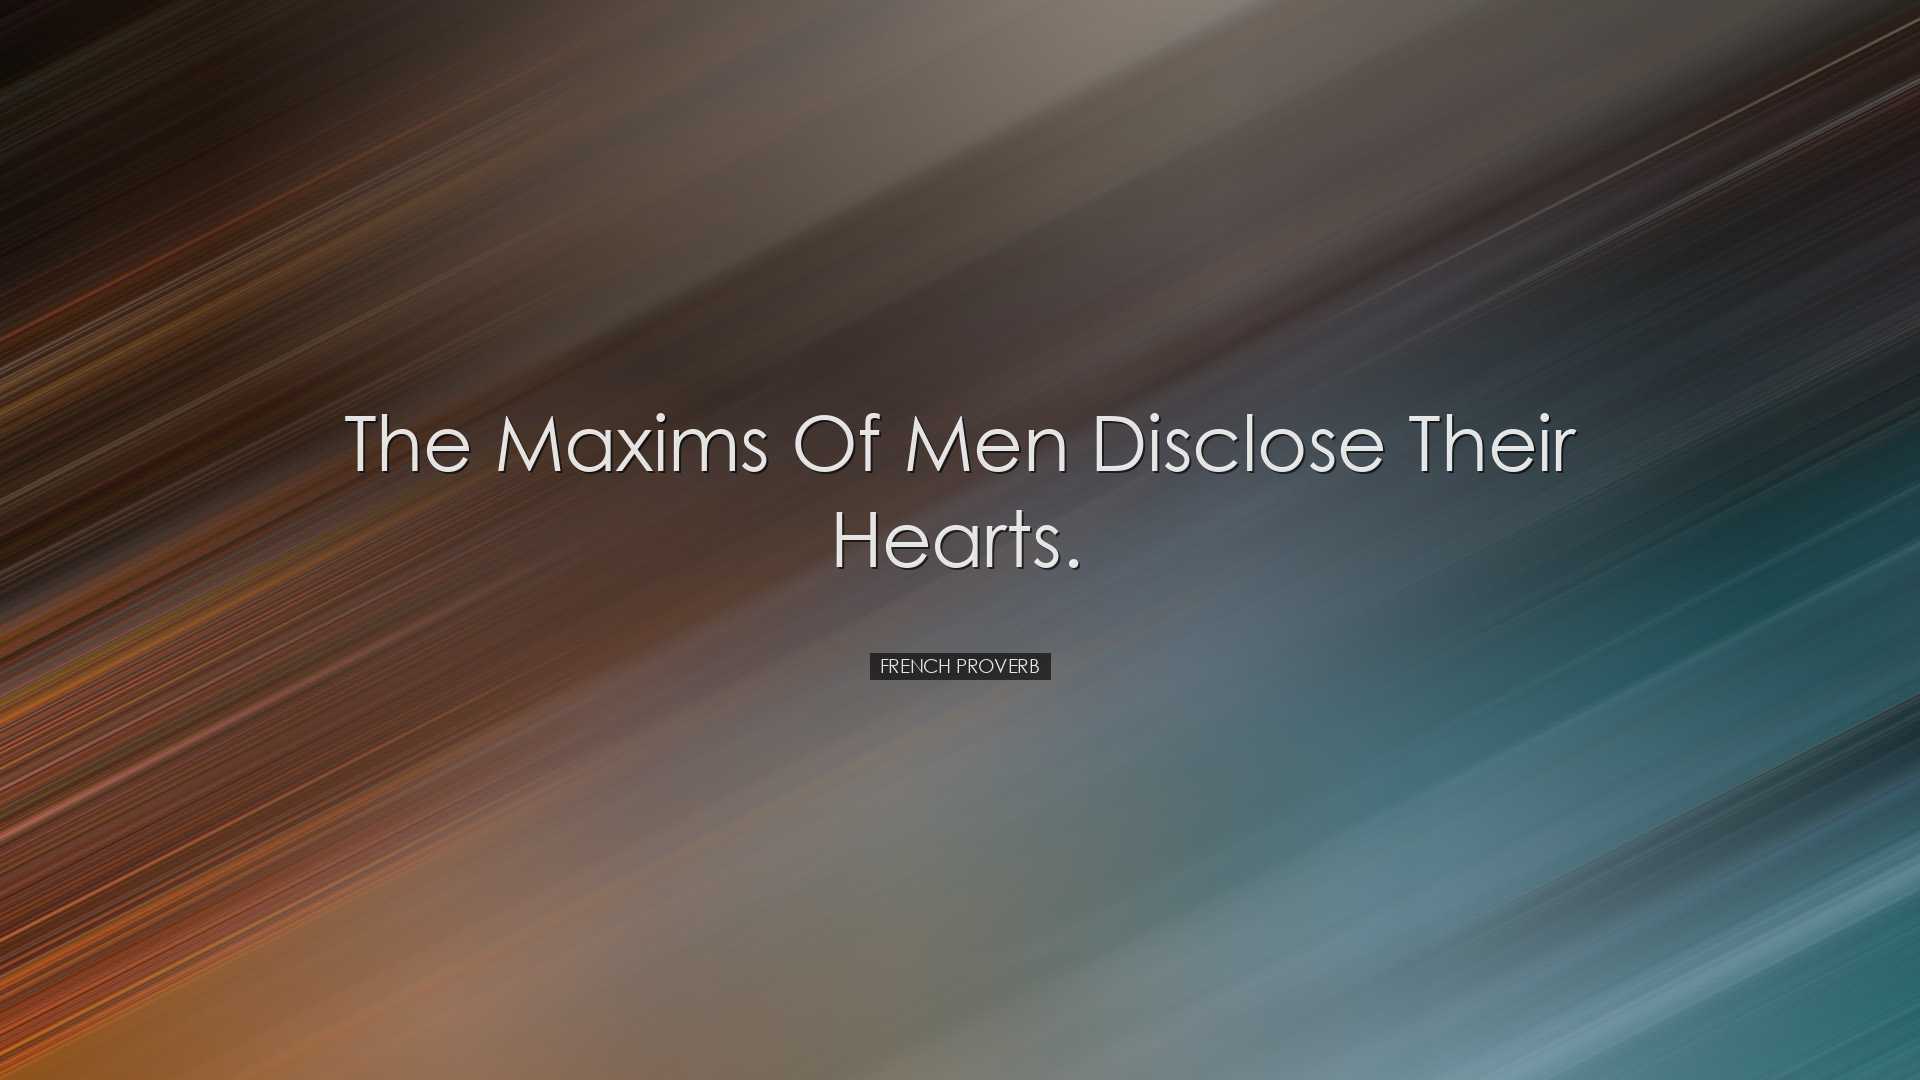 The maxims of men disclose their hearts. - French Proverb